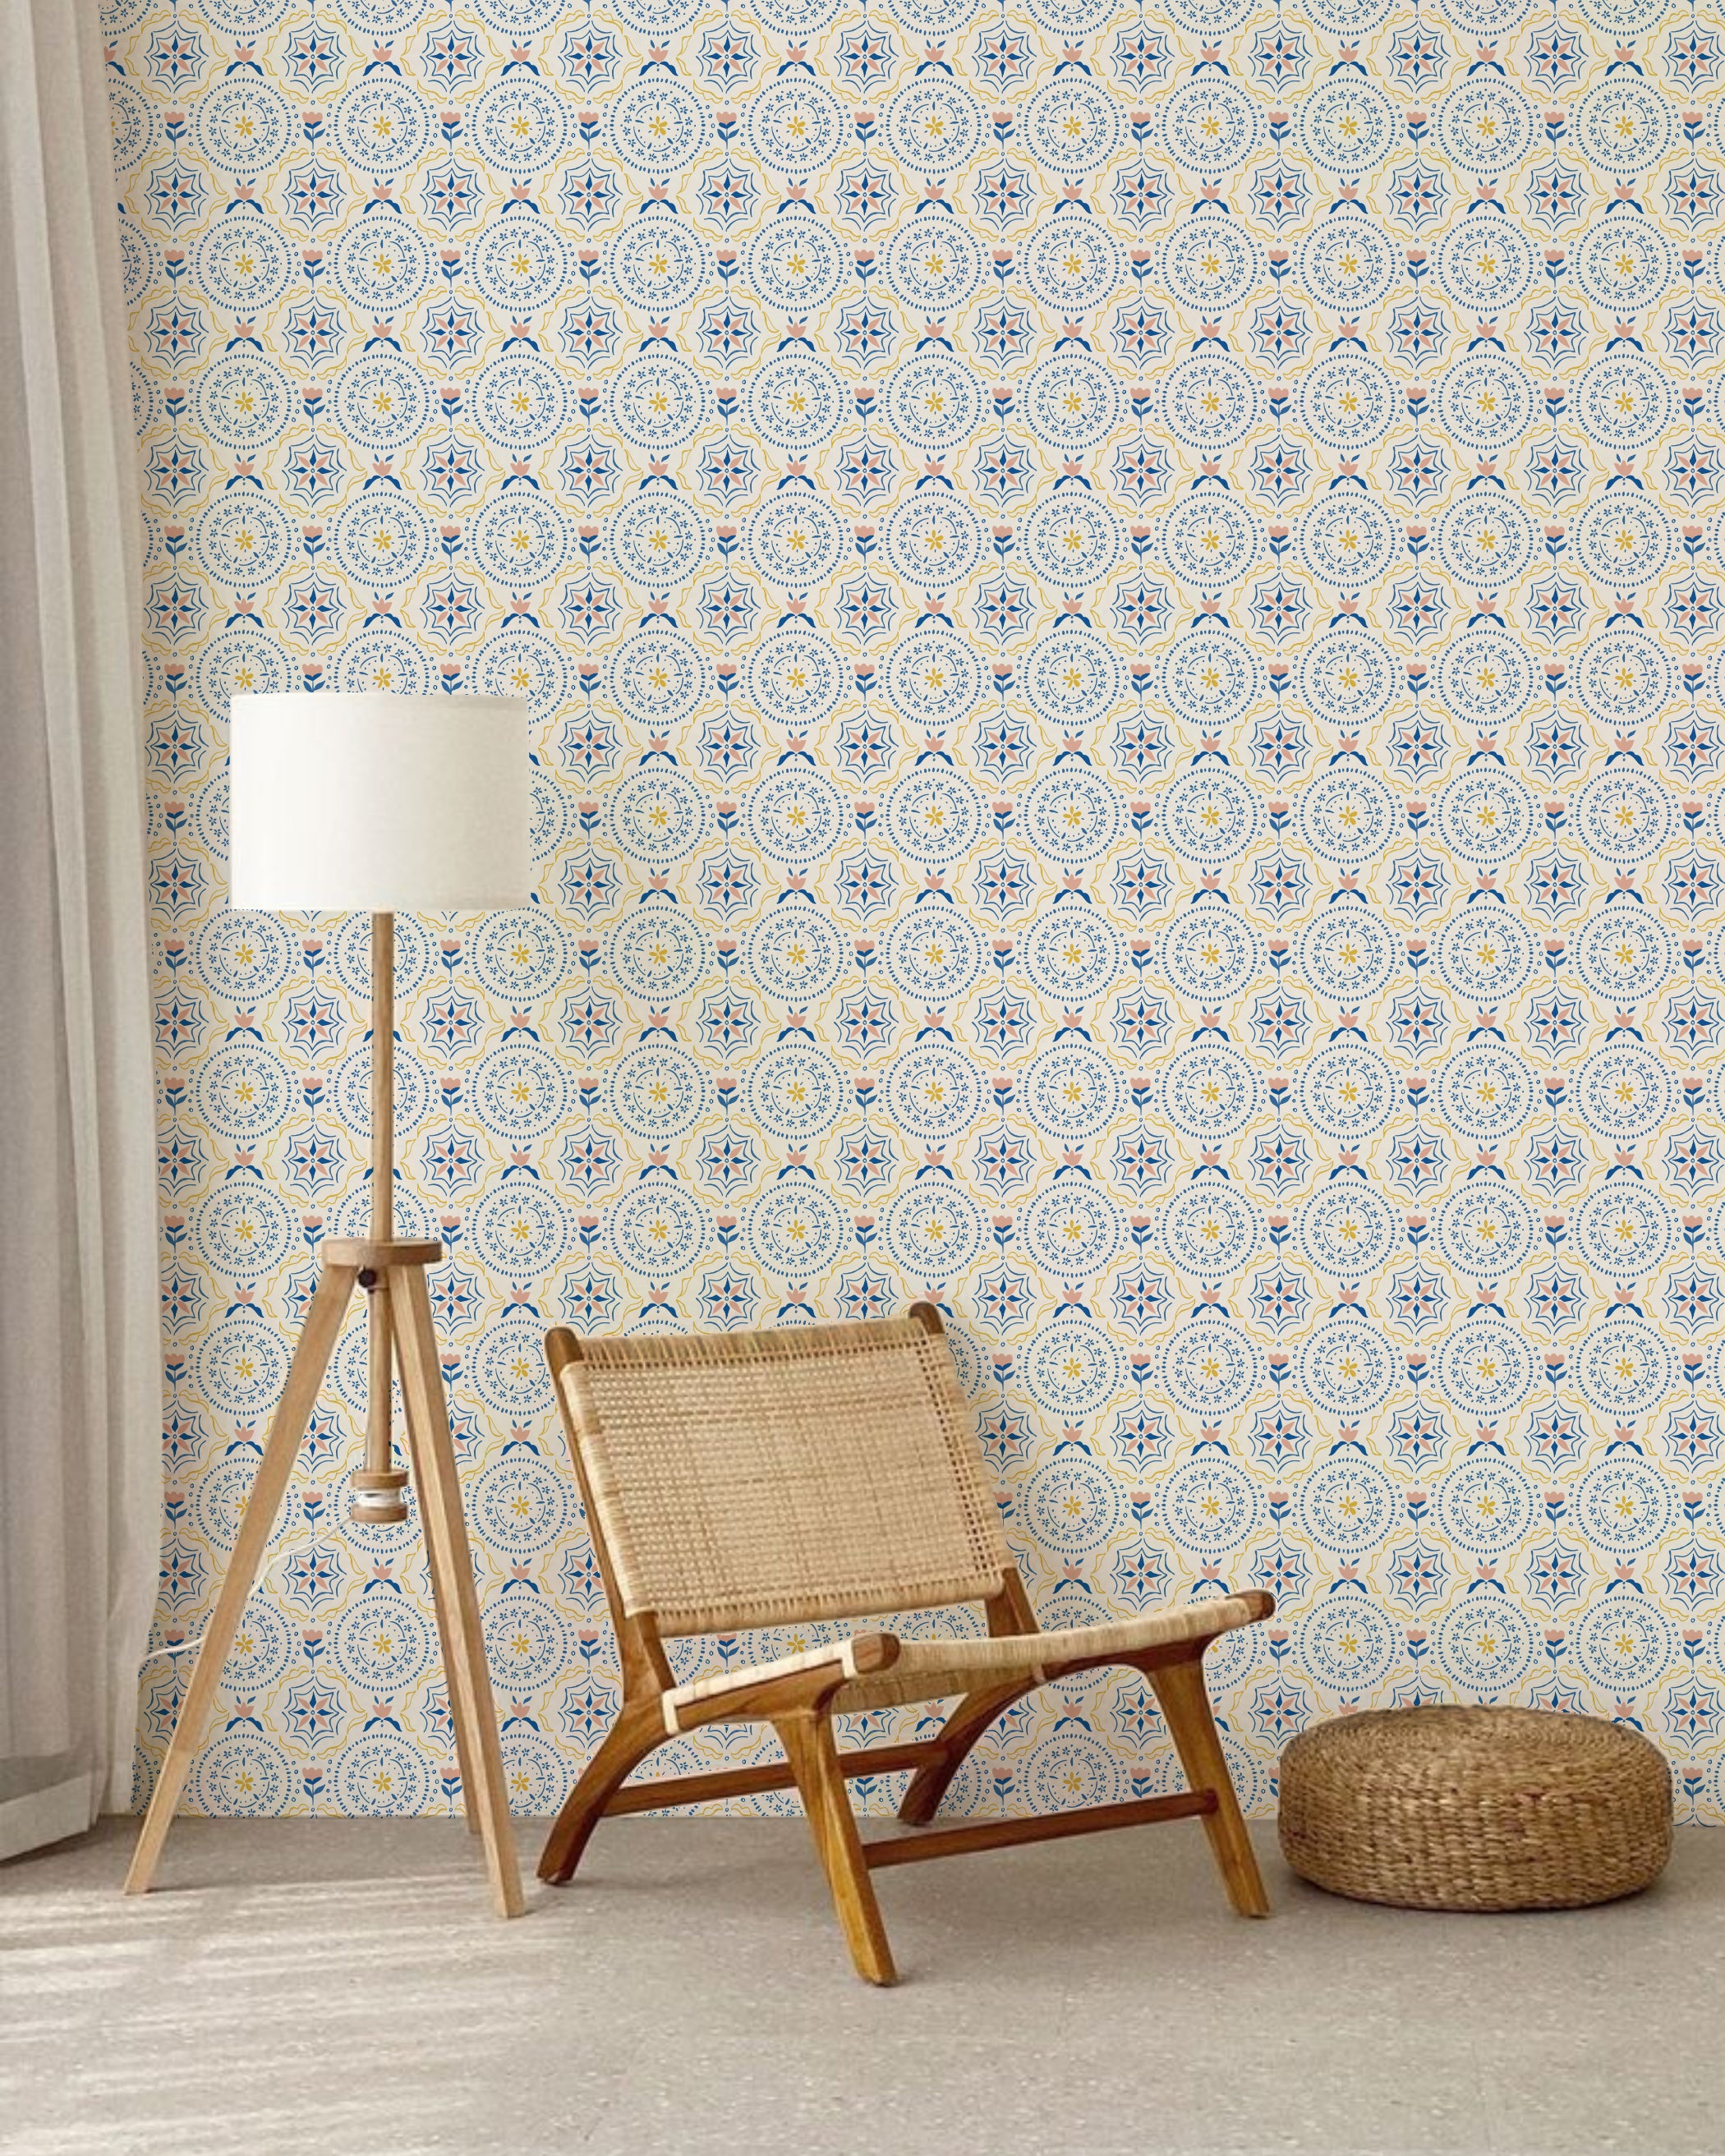 A cozy living area featuring a rattan chair and wooden floor lamp against a wall covered in wallpaper with a star-shaped floral design in blue and yellow